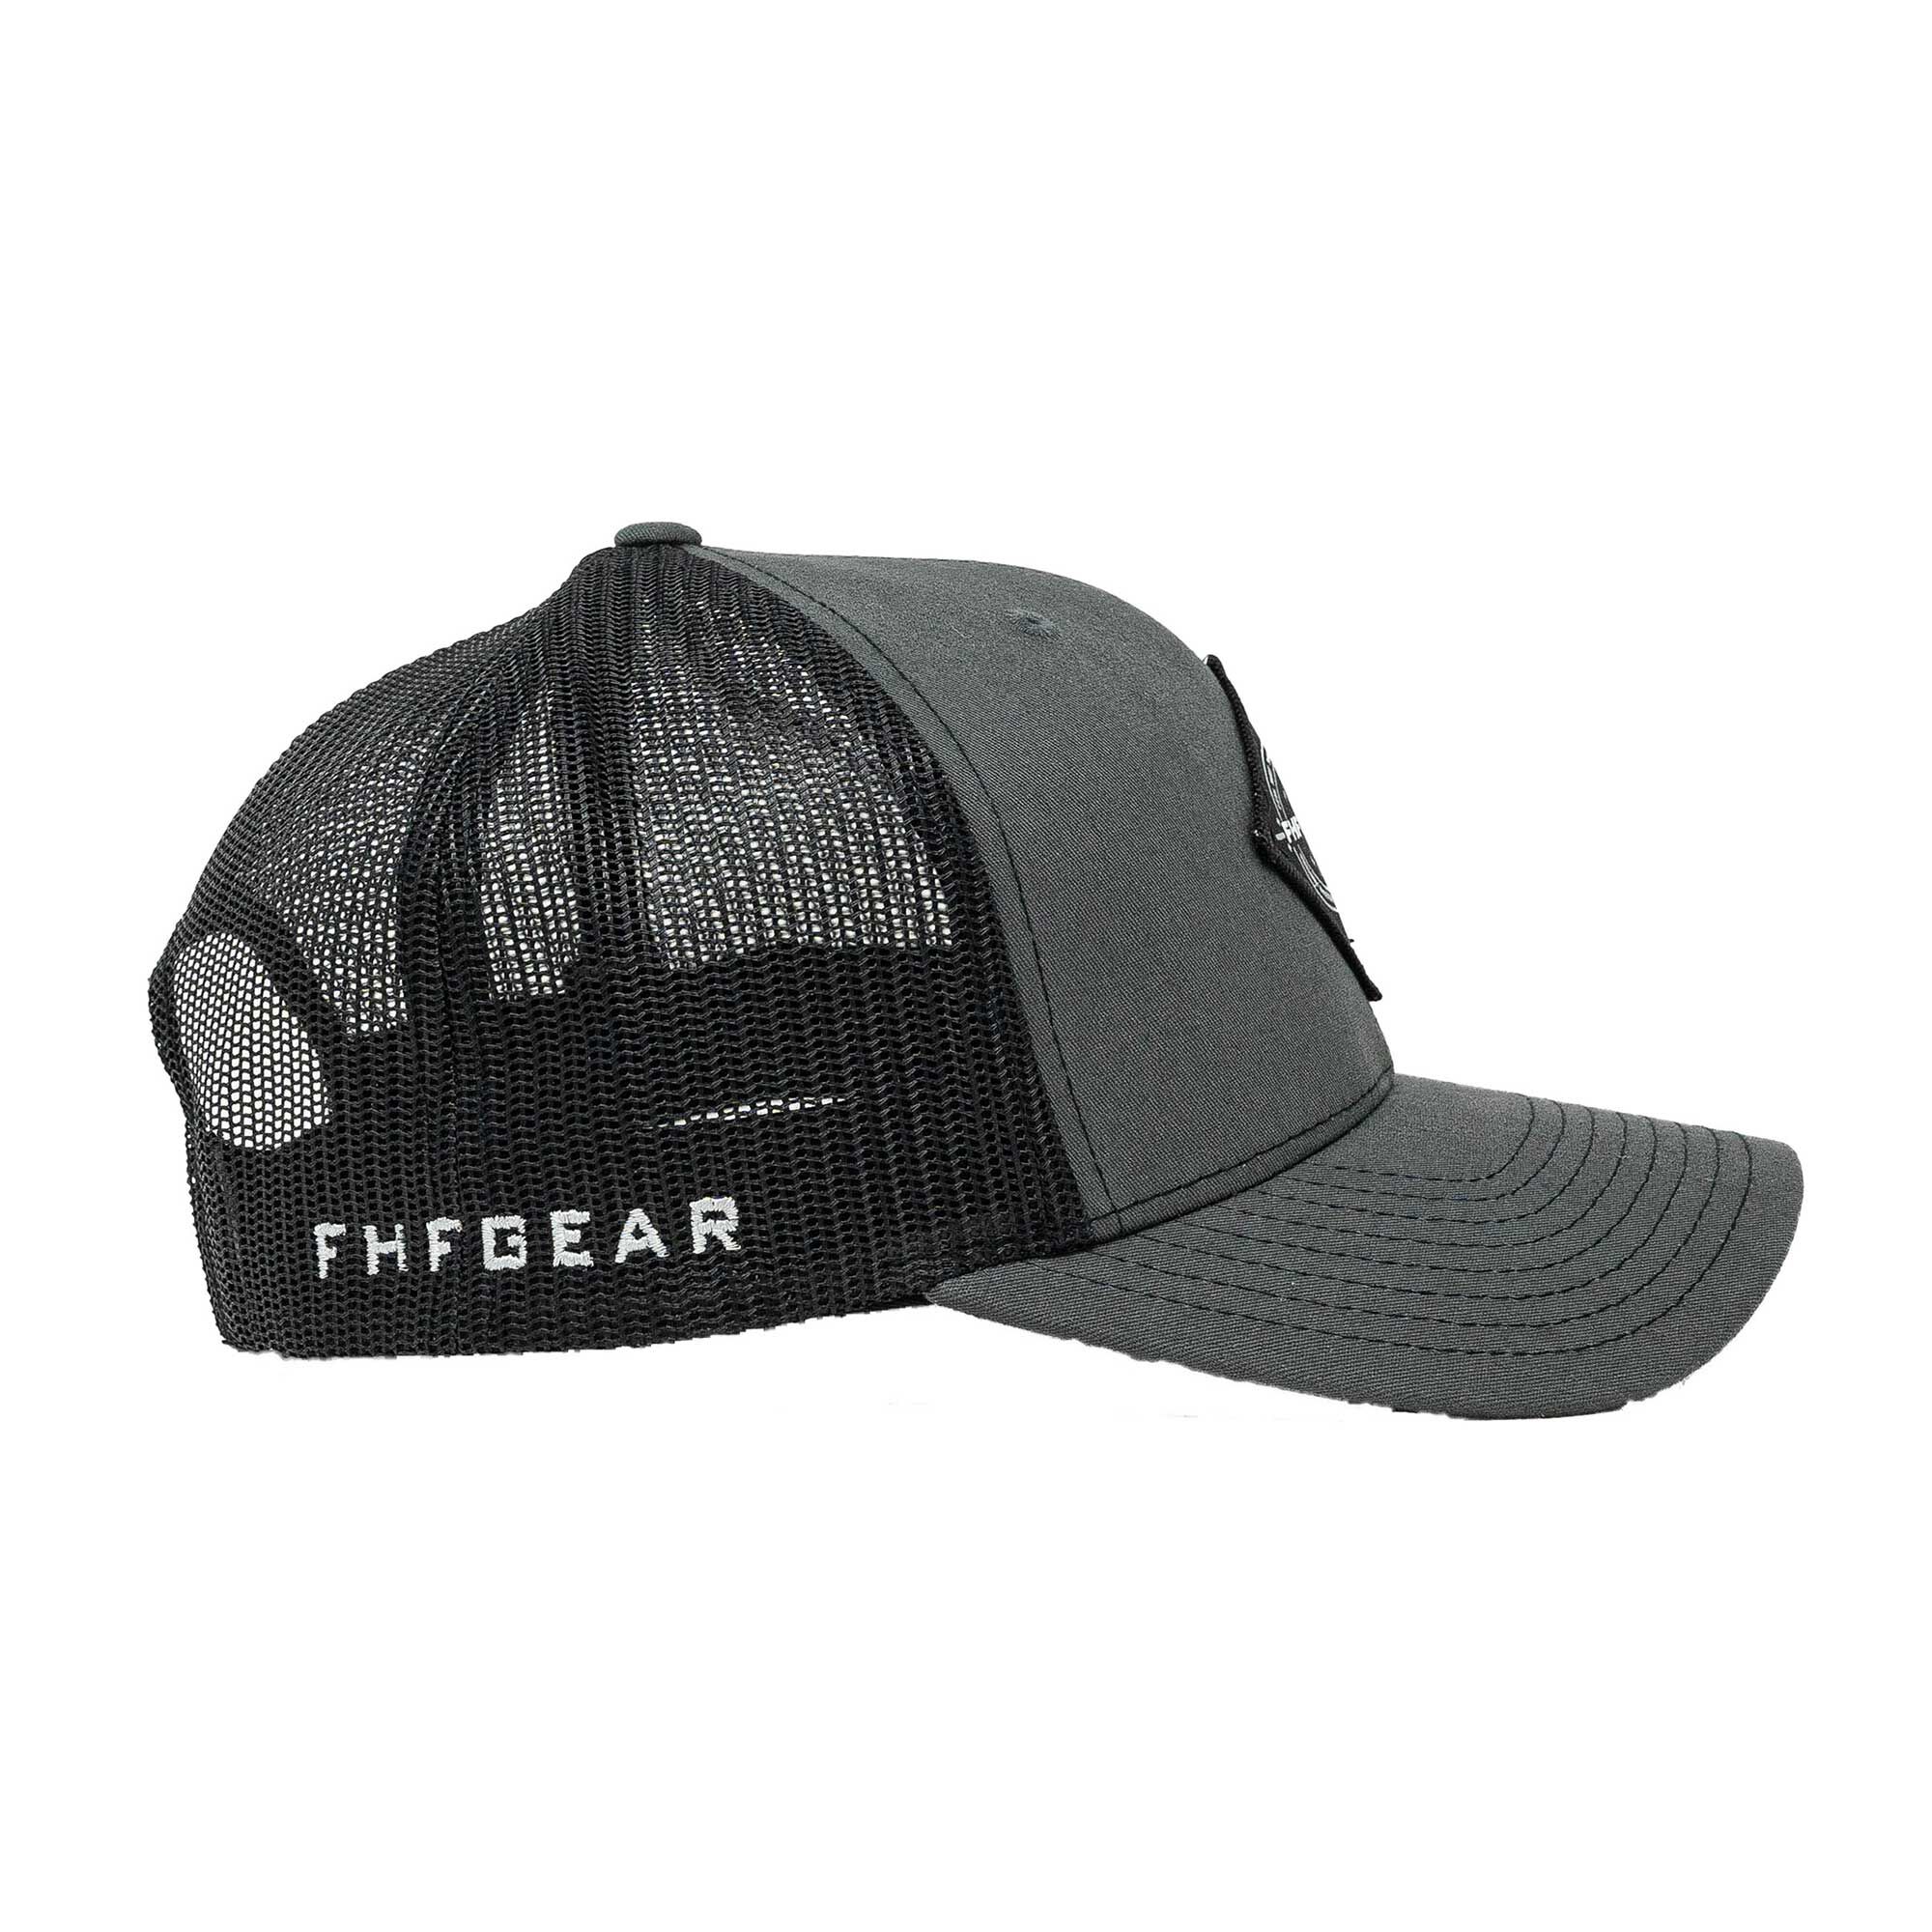 FHF Sights Patch Trucker Hat | FHF Gear